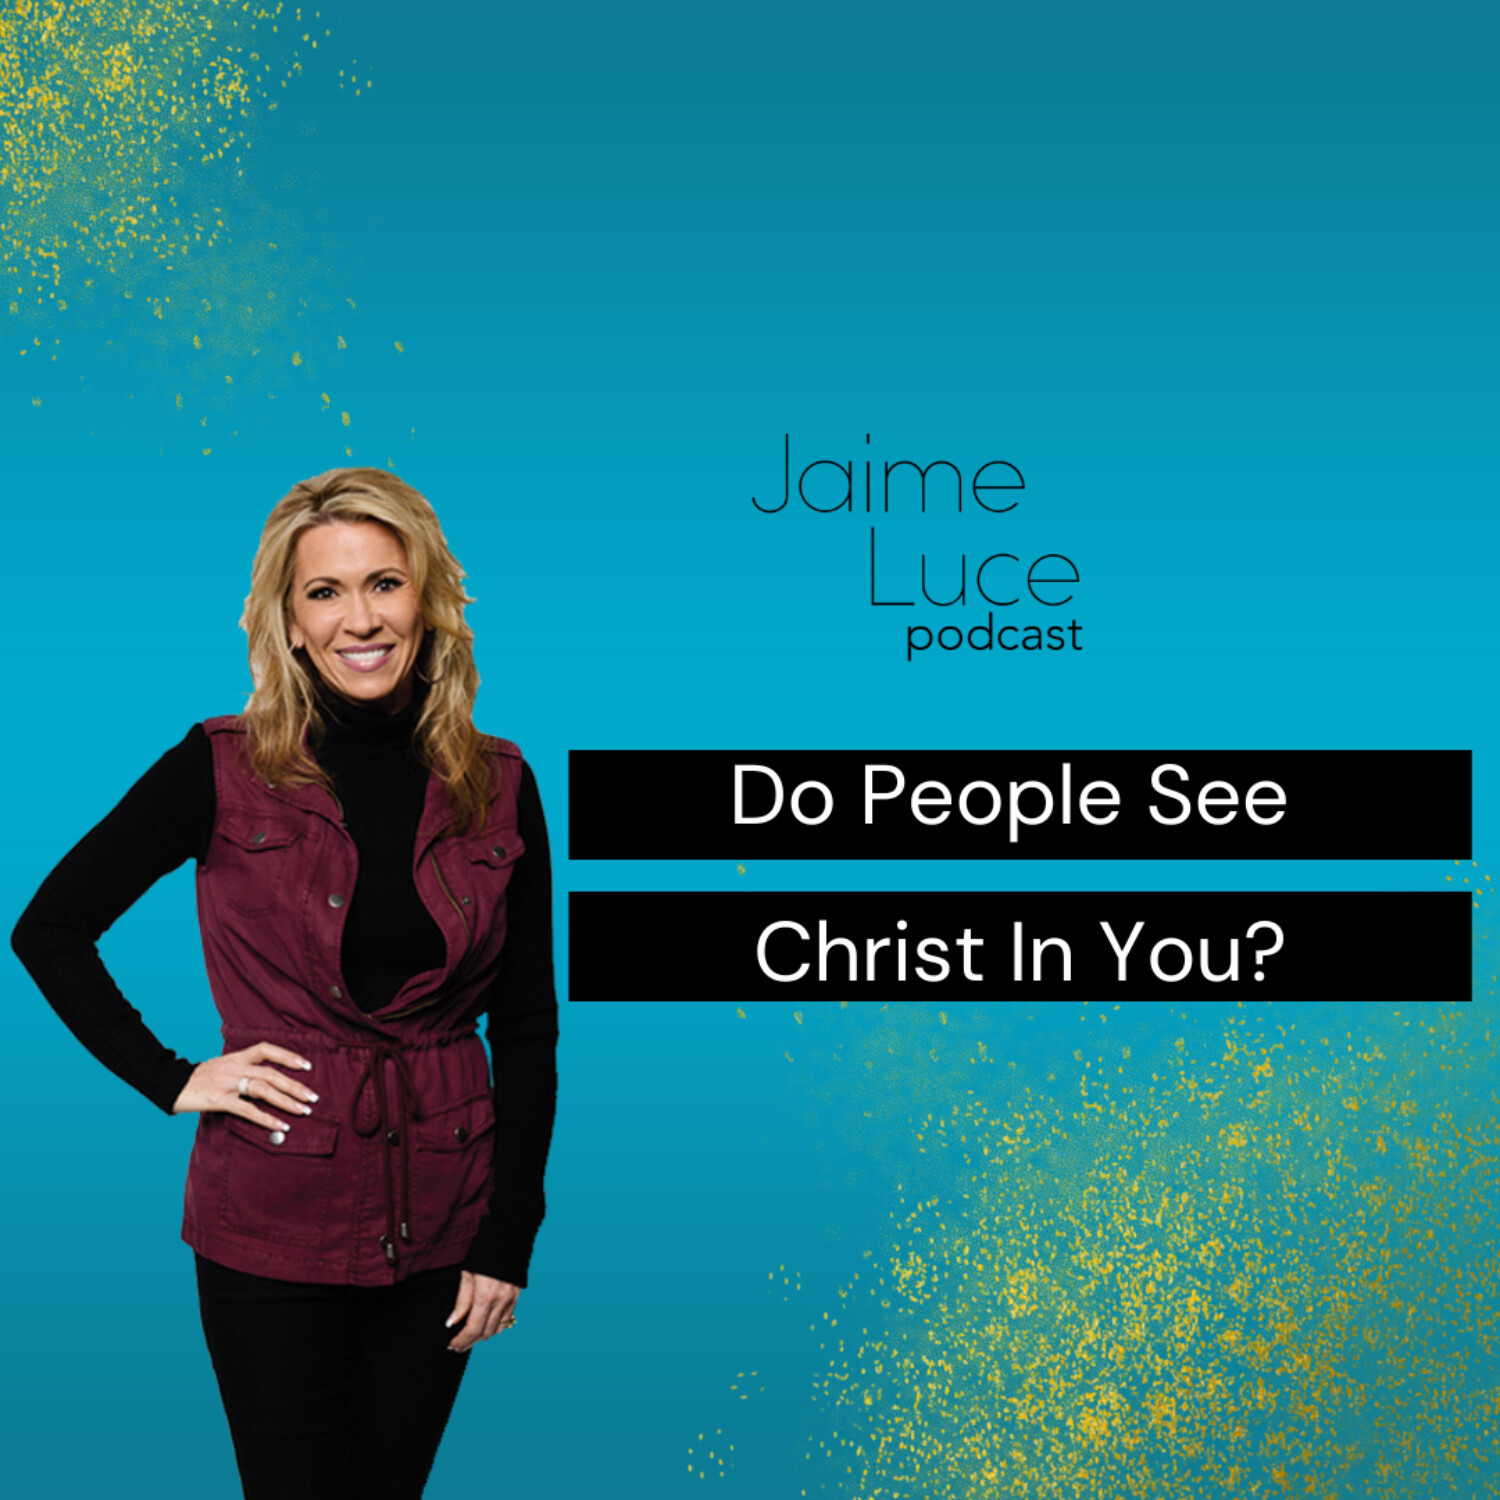 Do People See Christ In You?